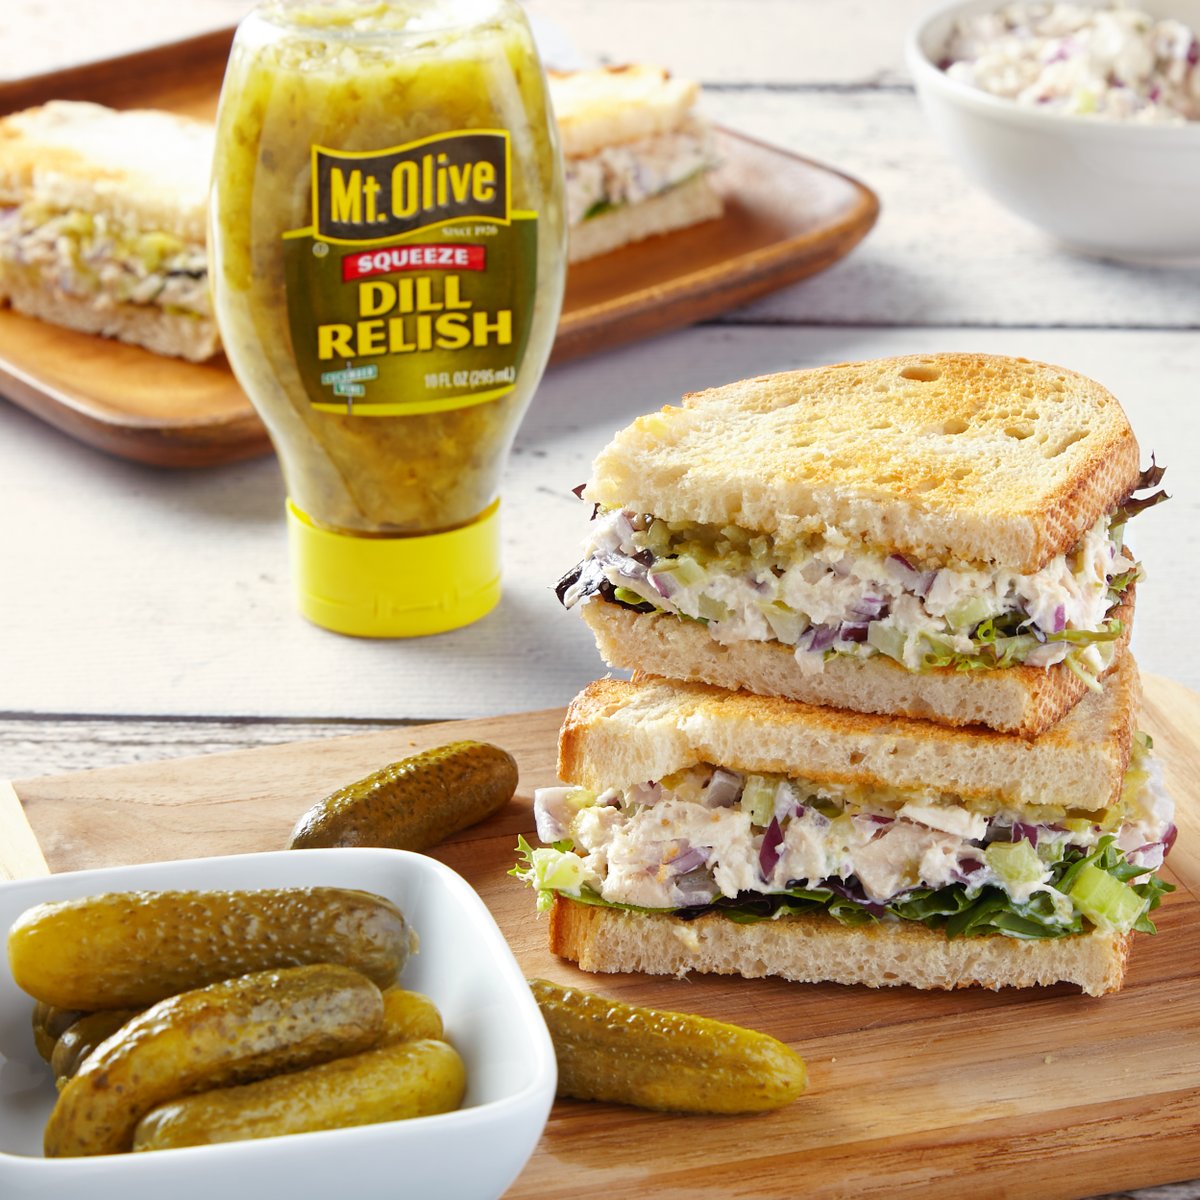 🥪 National Sandwich Month continues! How do you make your tuna salad? 🥒 Ours features red onion, celery, and dill relish!

Recipe: mtolivepickles.com/recipe-items/t…

#TunaSalad #TunaSaladSandwich #Relish #SweetRelish #DillRelish #DillRelish #KosherDill #TunaSalad #BestTunaSalad